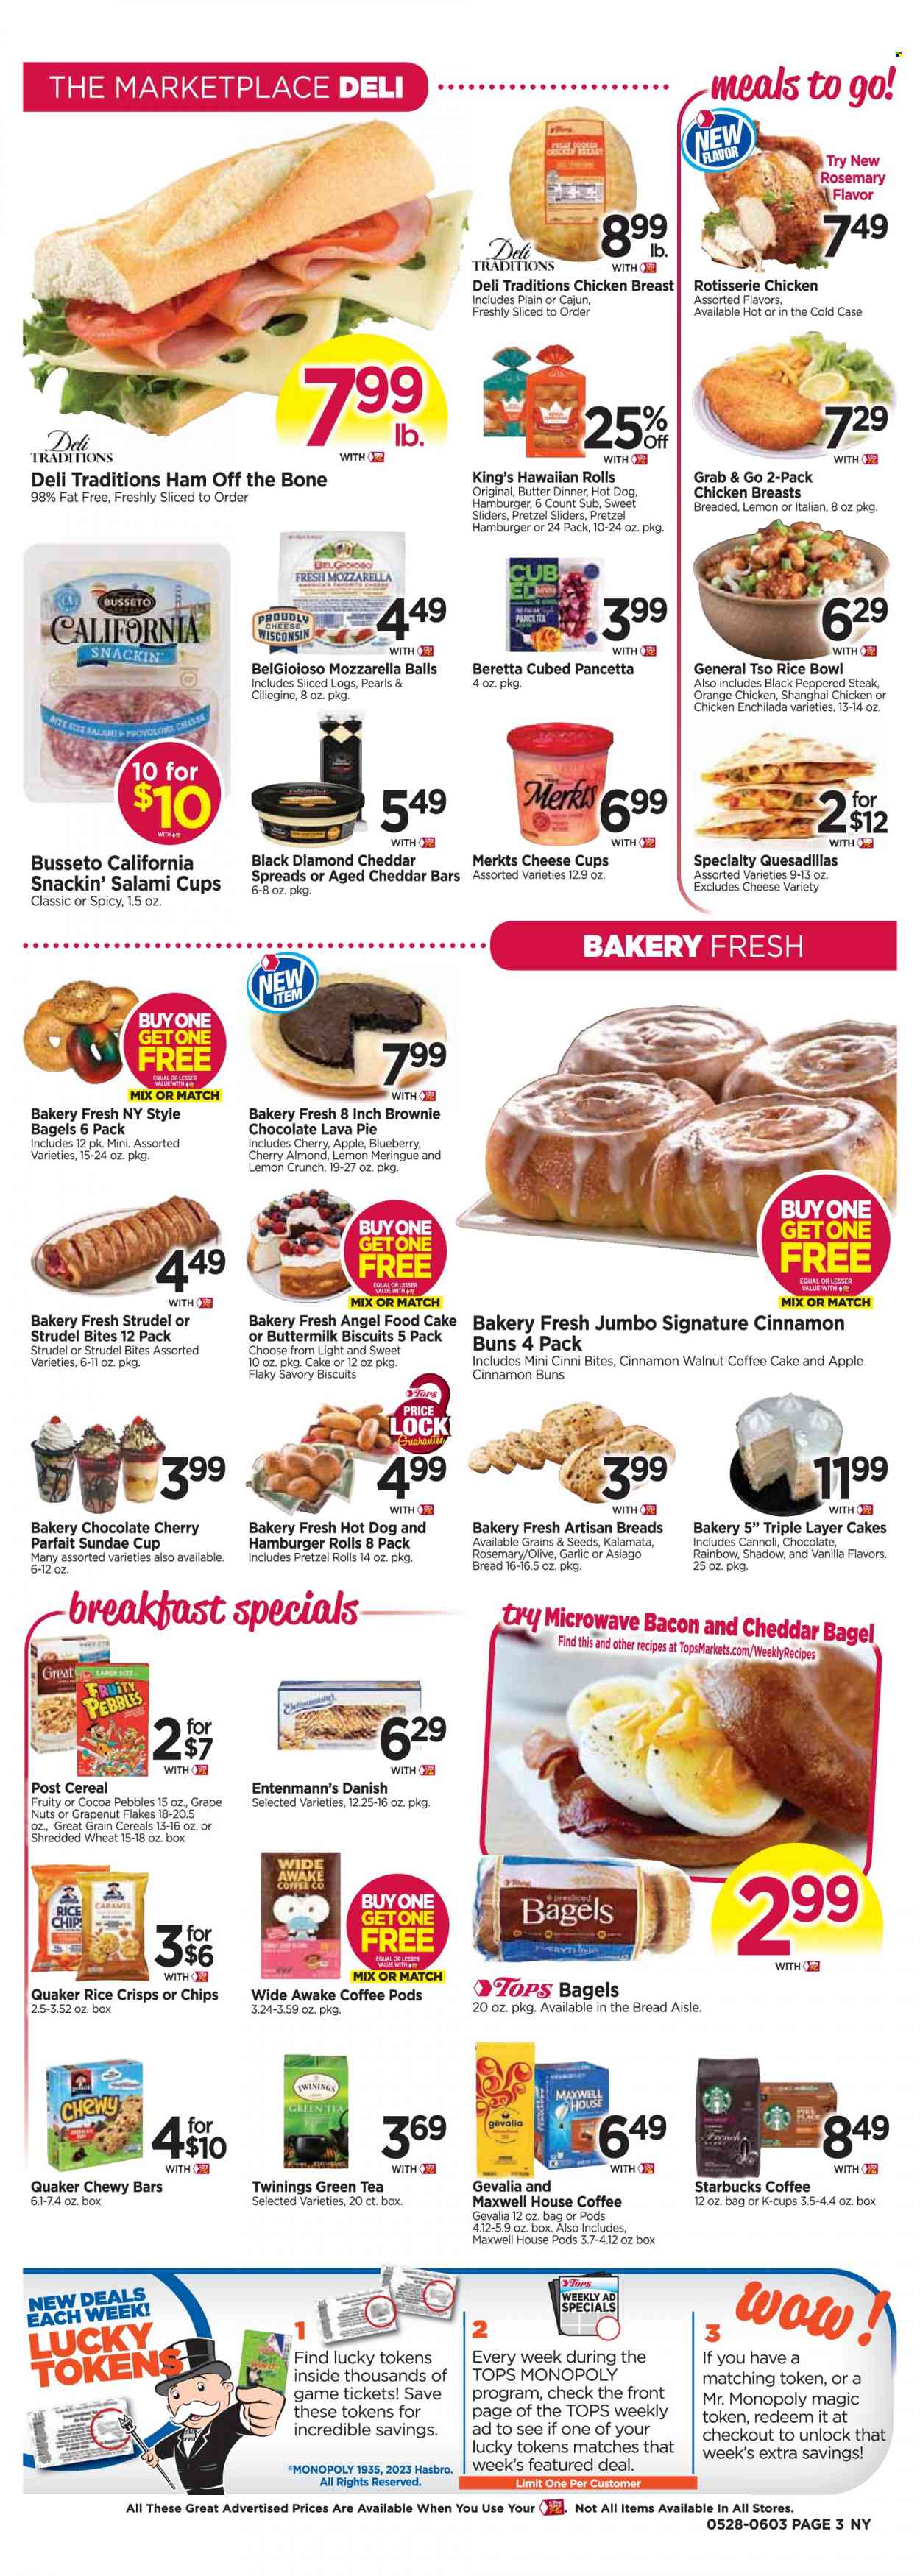 thumbnail - Tops Flyer - 05/28/2023 - 06/03/2023 - Sales products - bagels, pretzels, cake, pie, strudel, burger buns, hawaiian rolls, brownies, Angel Food, coffee cake, Entenmann's, garlic, cherries, oranges, enchiladas, hot dog, chicken enchiladas, chicken roast, hamburger, Quaker, ready meal, bacon, salami, ham, pancetta, ham off the bone, asiago, mozzarella, cheese cup, Provolone, buttermilk, biscuit, chips, rice crisps, cereals, Fruity Pebbles, rosemary, cinnamon, caramel, green tea, Maxwell House, tea, Twinings, coffee pods, Starbucks, coffee capsules, K-Cups, Gevalia, chicken breasts, chicken, steak. Page 3.